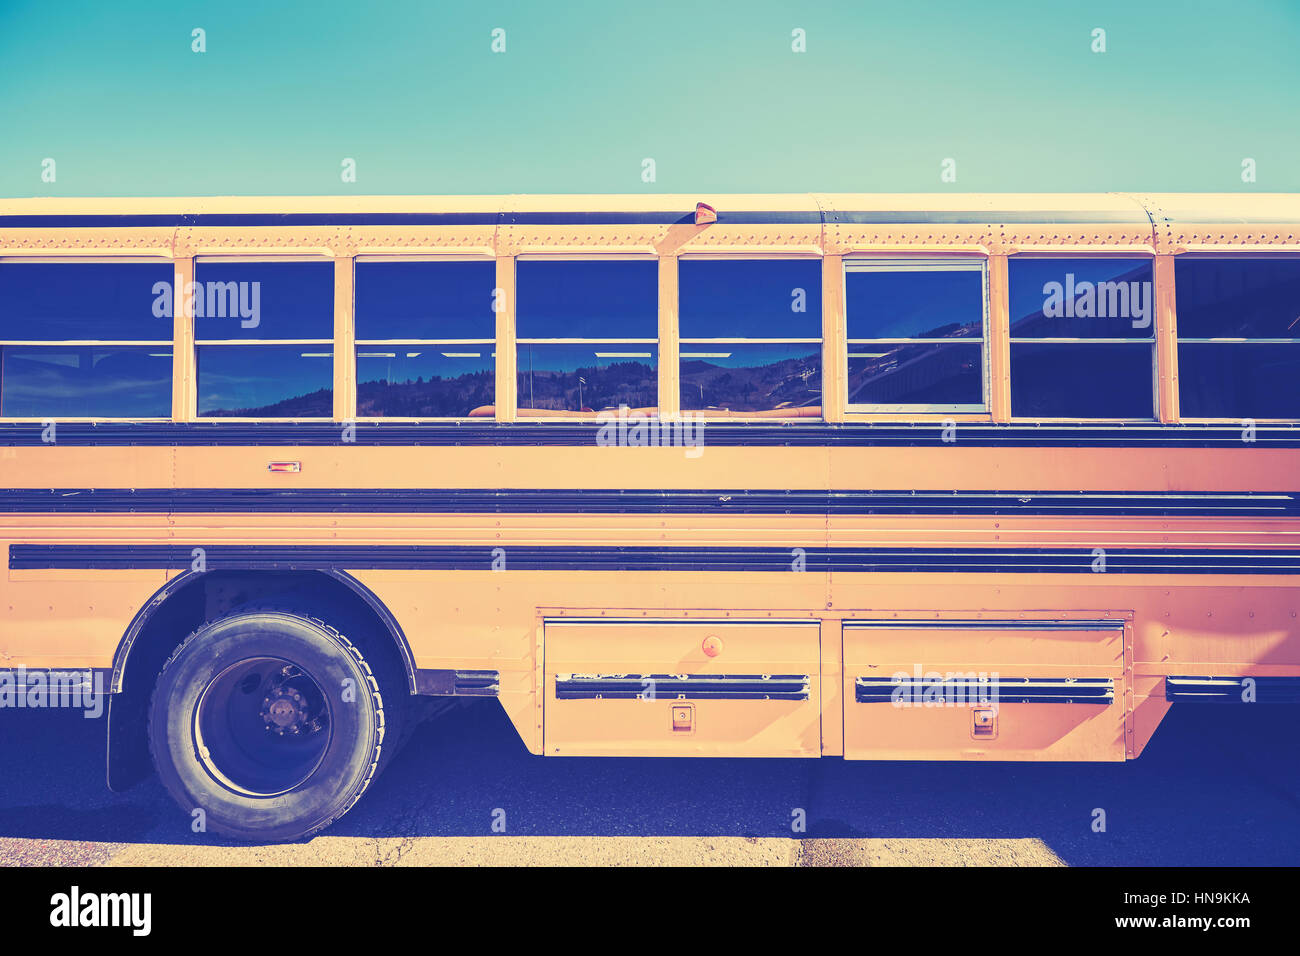 Retro stylized close up picture of a school bus side. Stock Photo